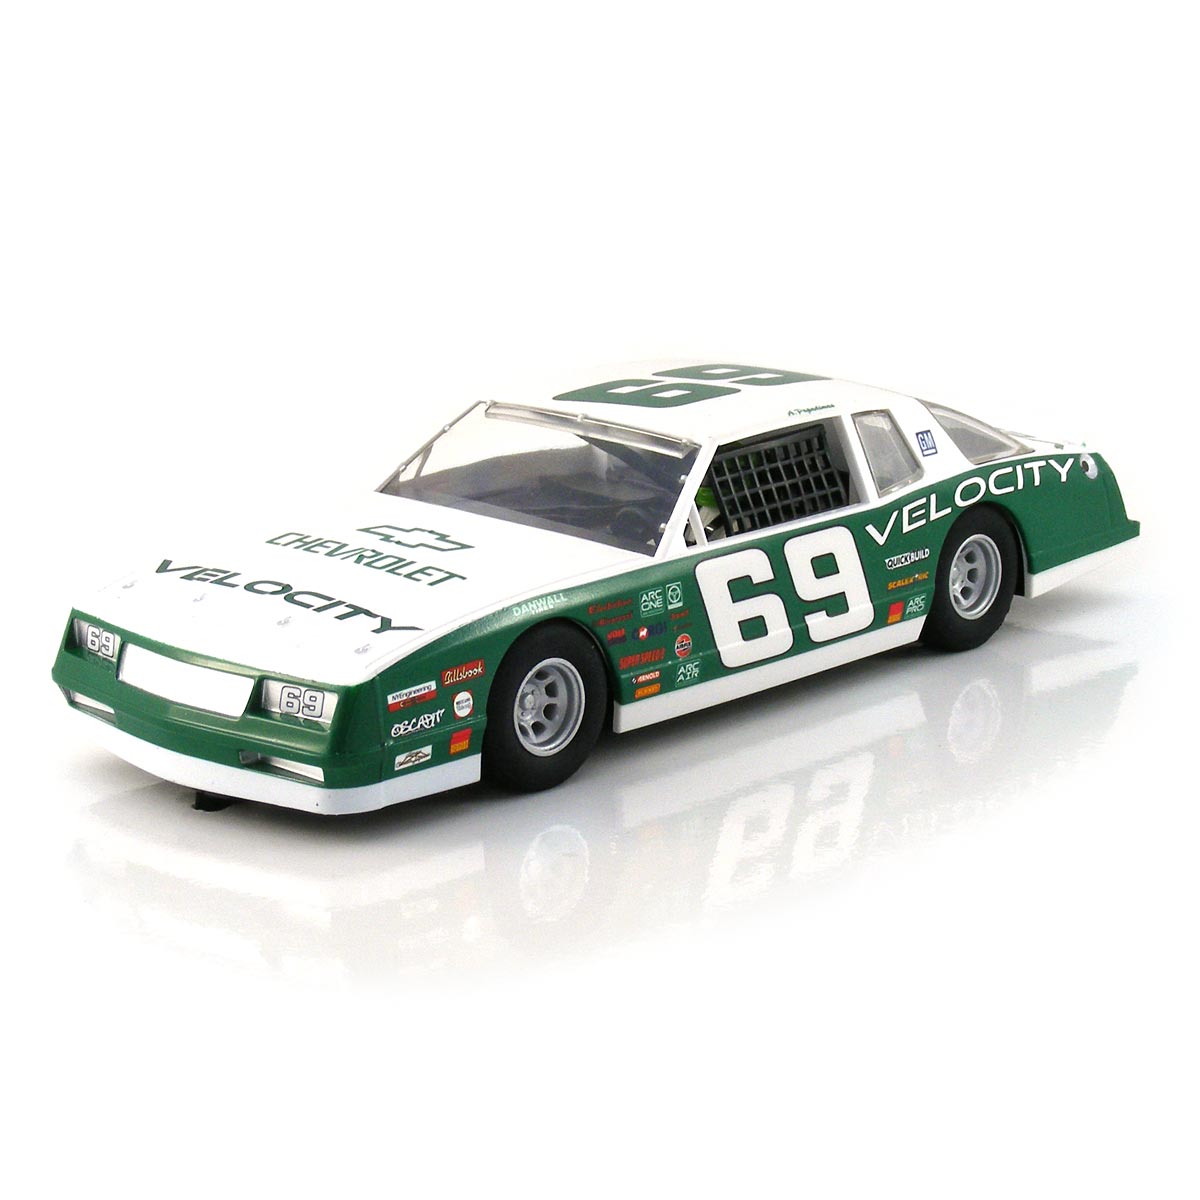 Scalextric C3947 Chevrolet Monte Carlo 1986 No.69 Green Boxed for sale online 